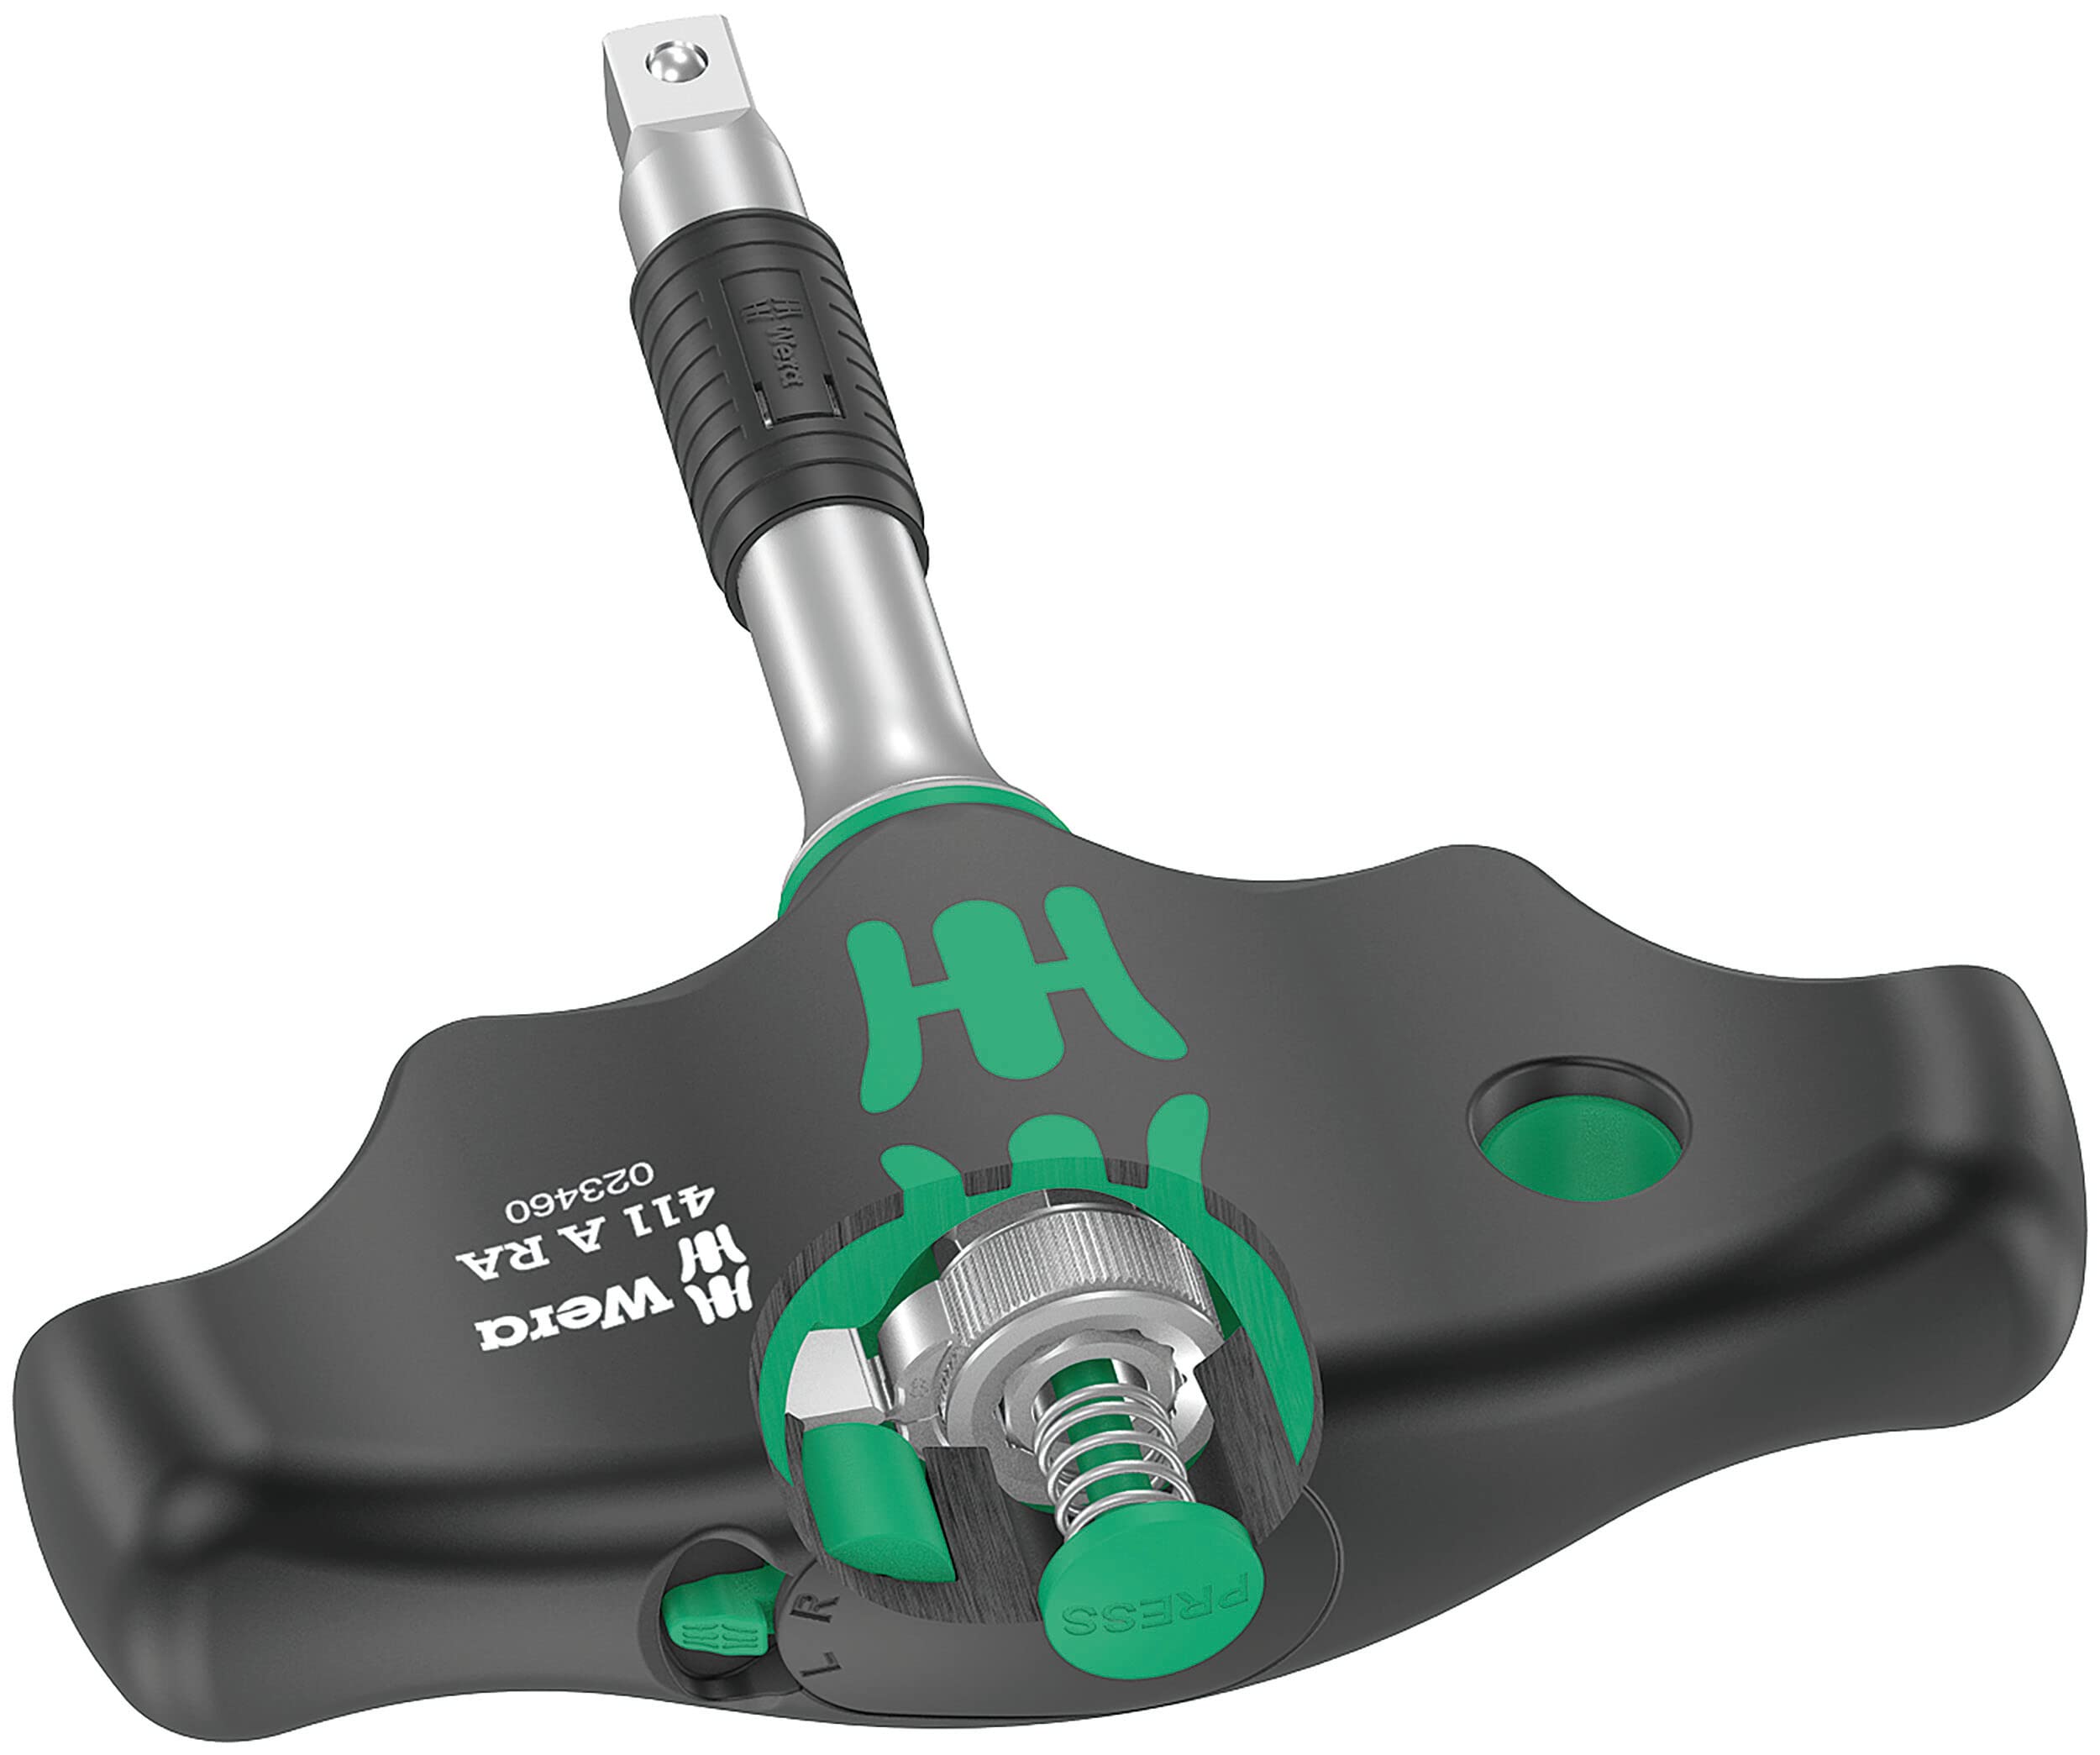 Wera T-handle Socket Driver Adapter with Ratchet Function (1/4" Drive)